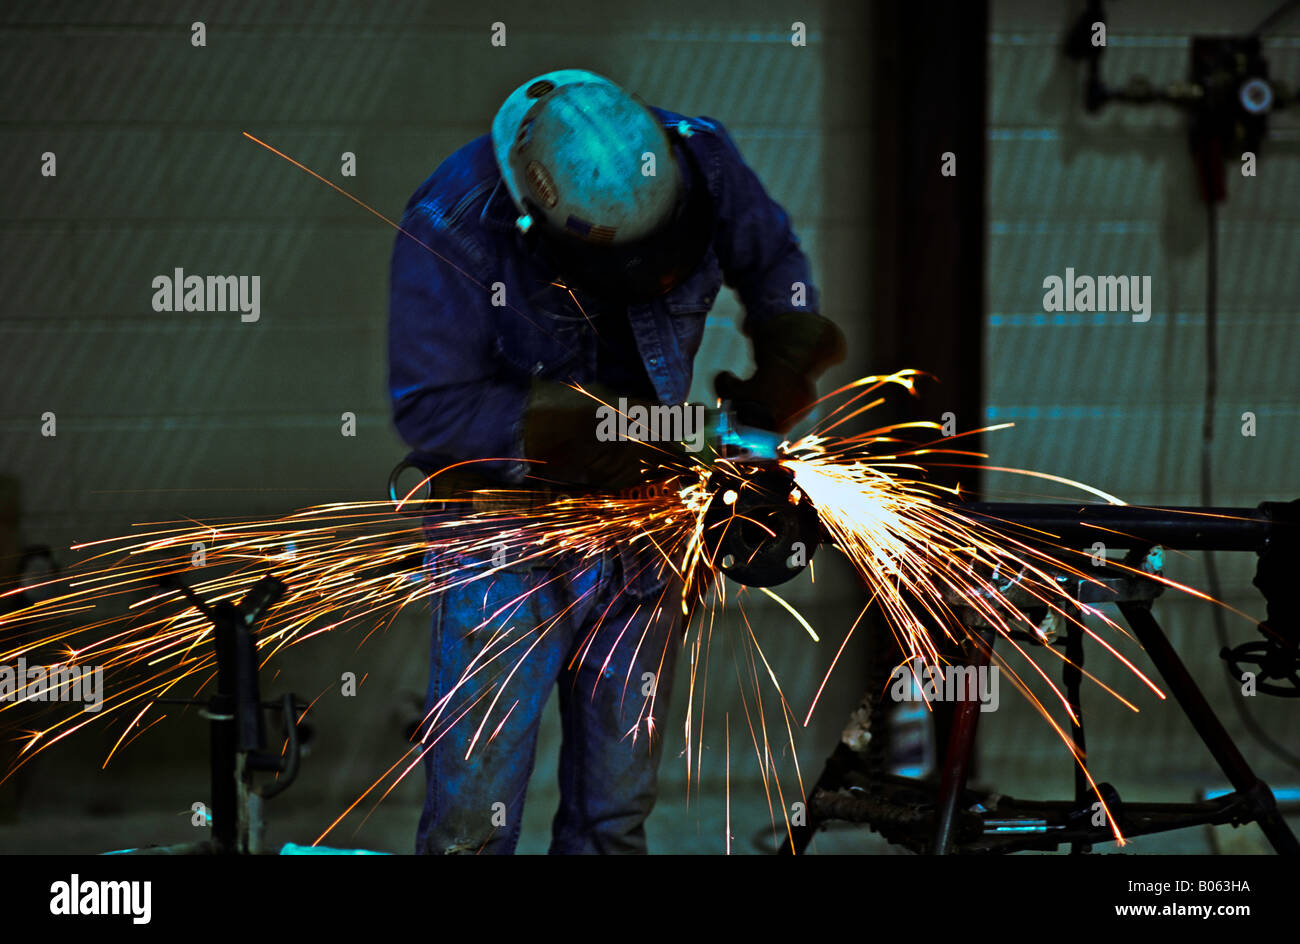 Male worker wearing appropriate safety equipment uses a grinder in the construction area of a piping fabrication plant Stock Photo